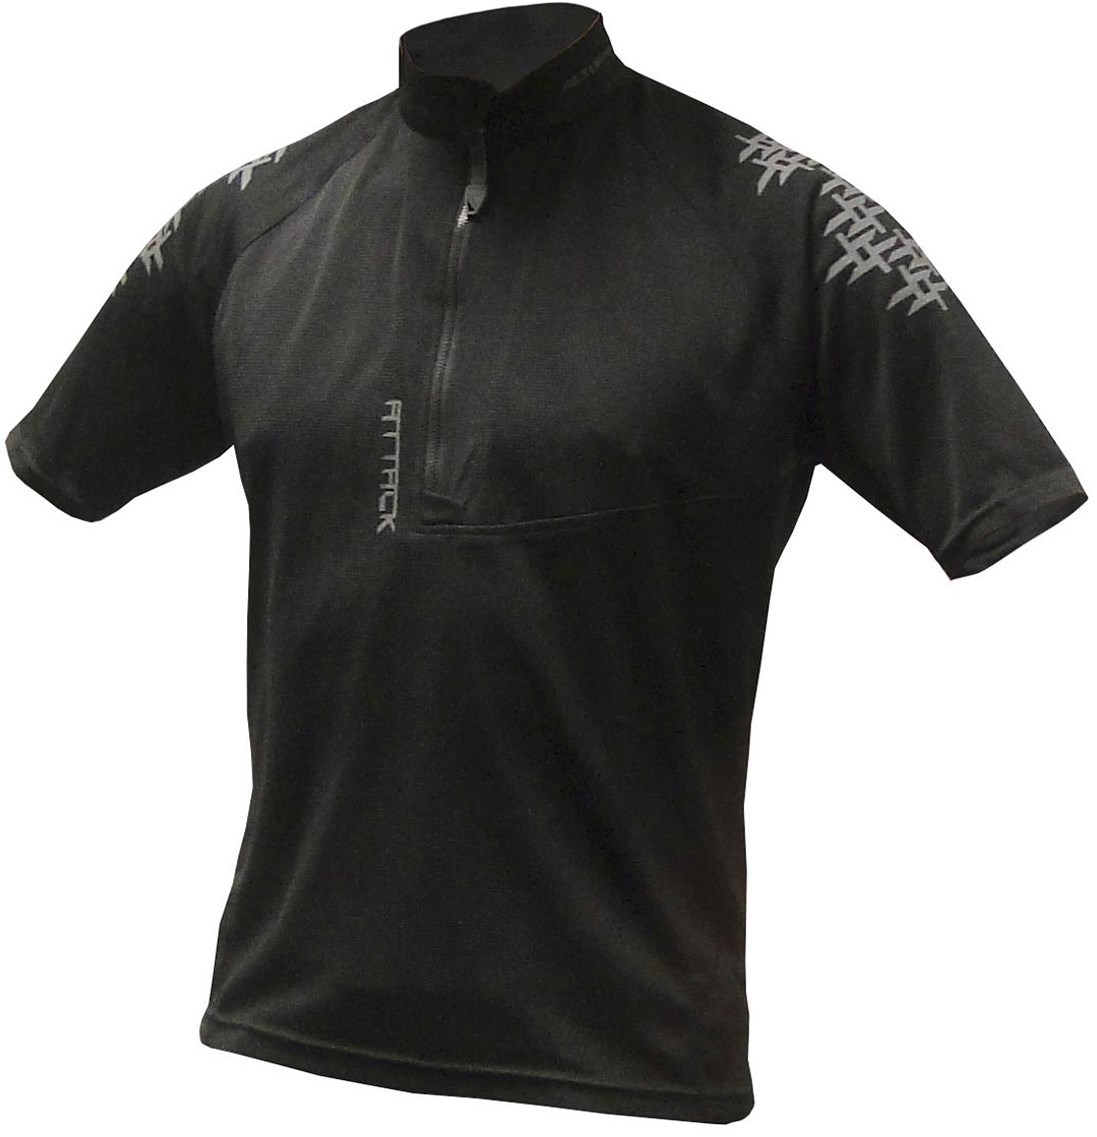 Altura Attack Short Sleeve Jersey 2012 product image